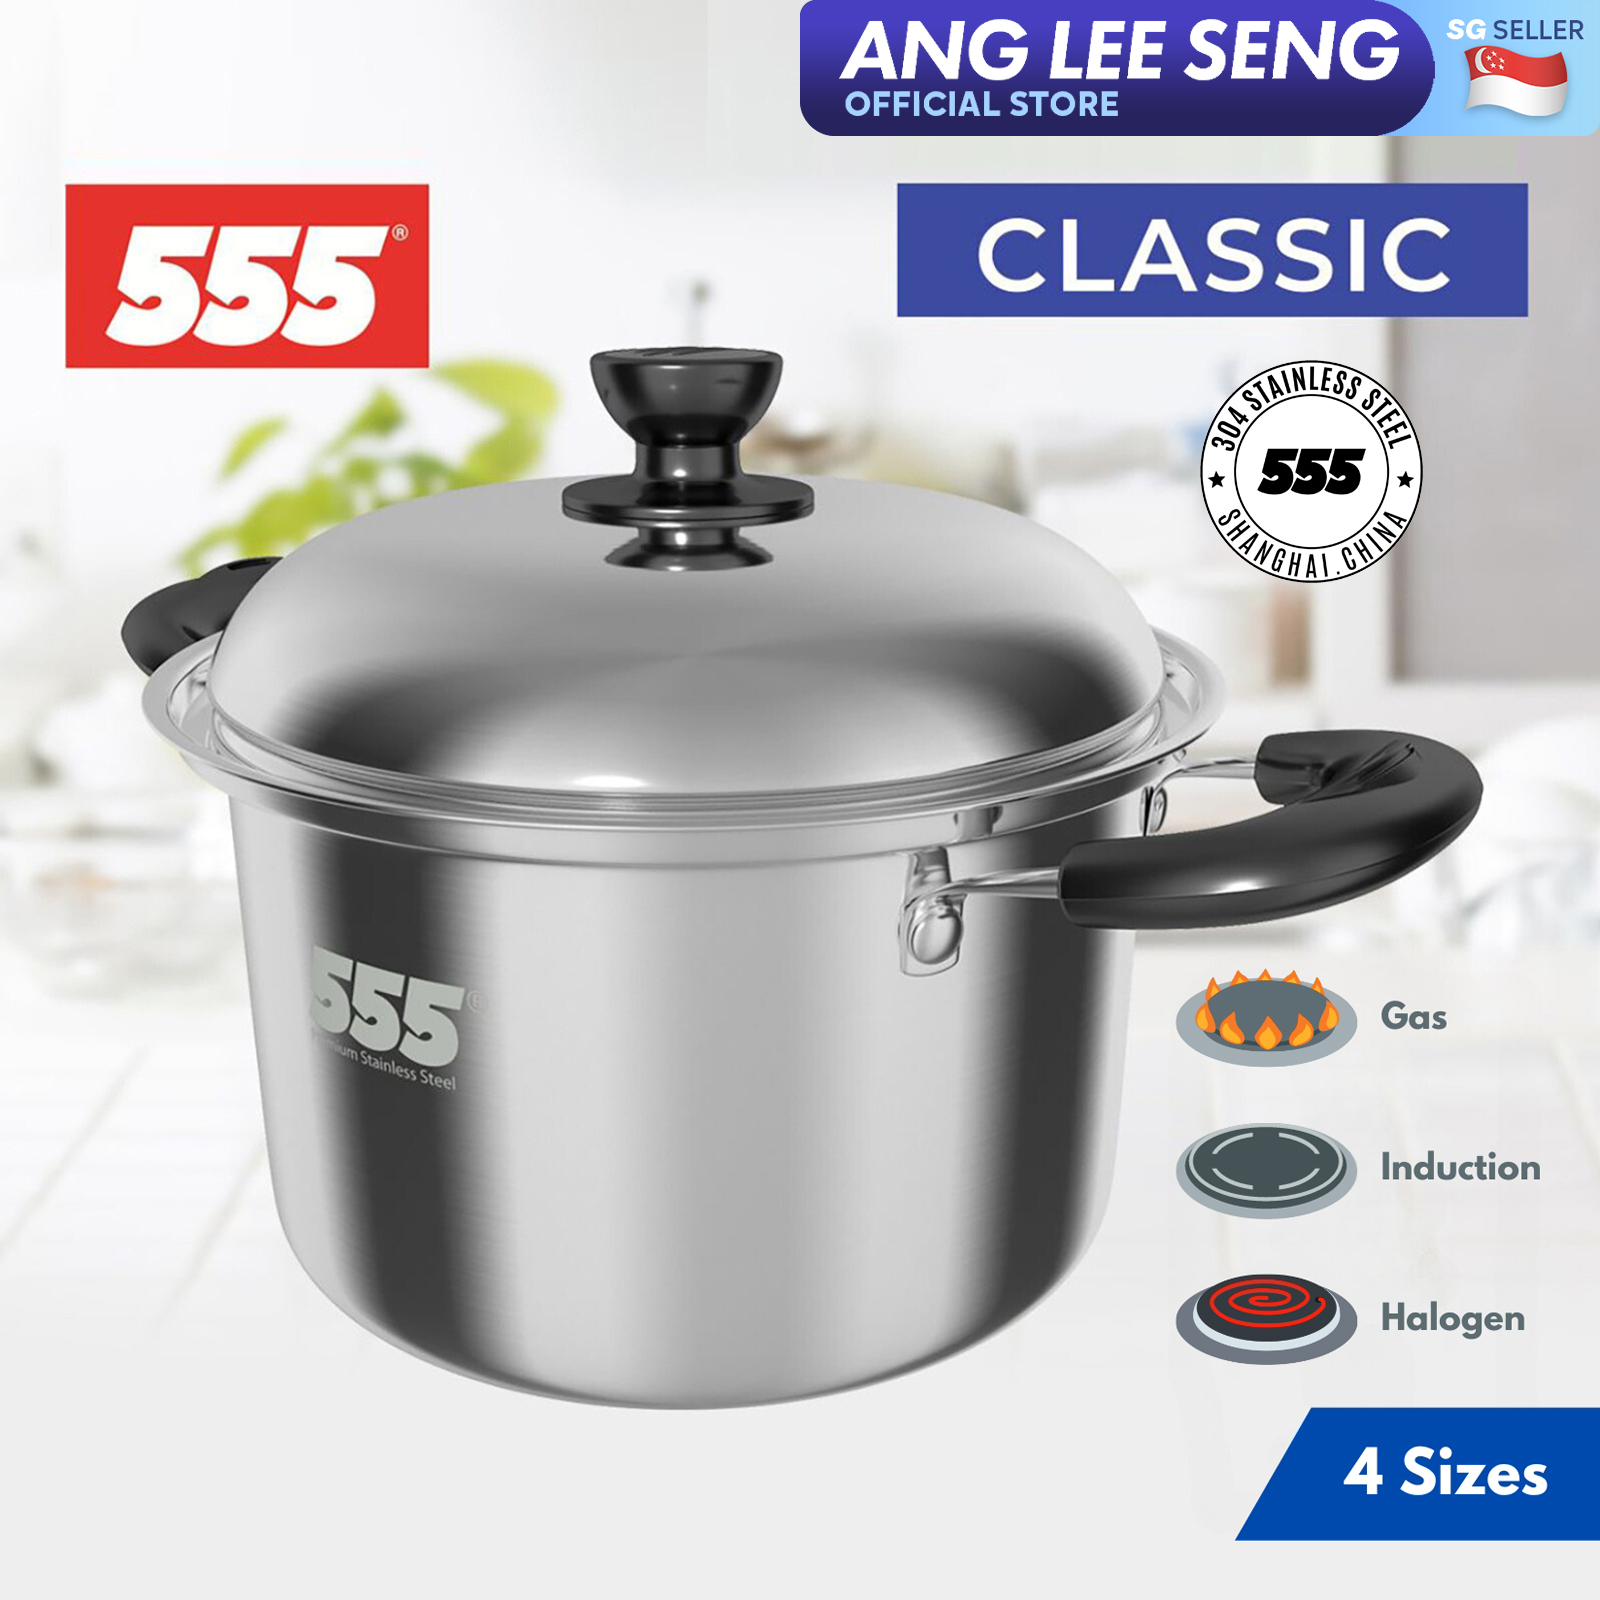 555 Classic Stainless Steel Cooking Pot